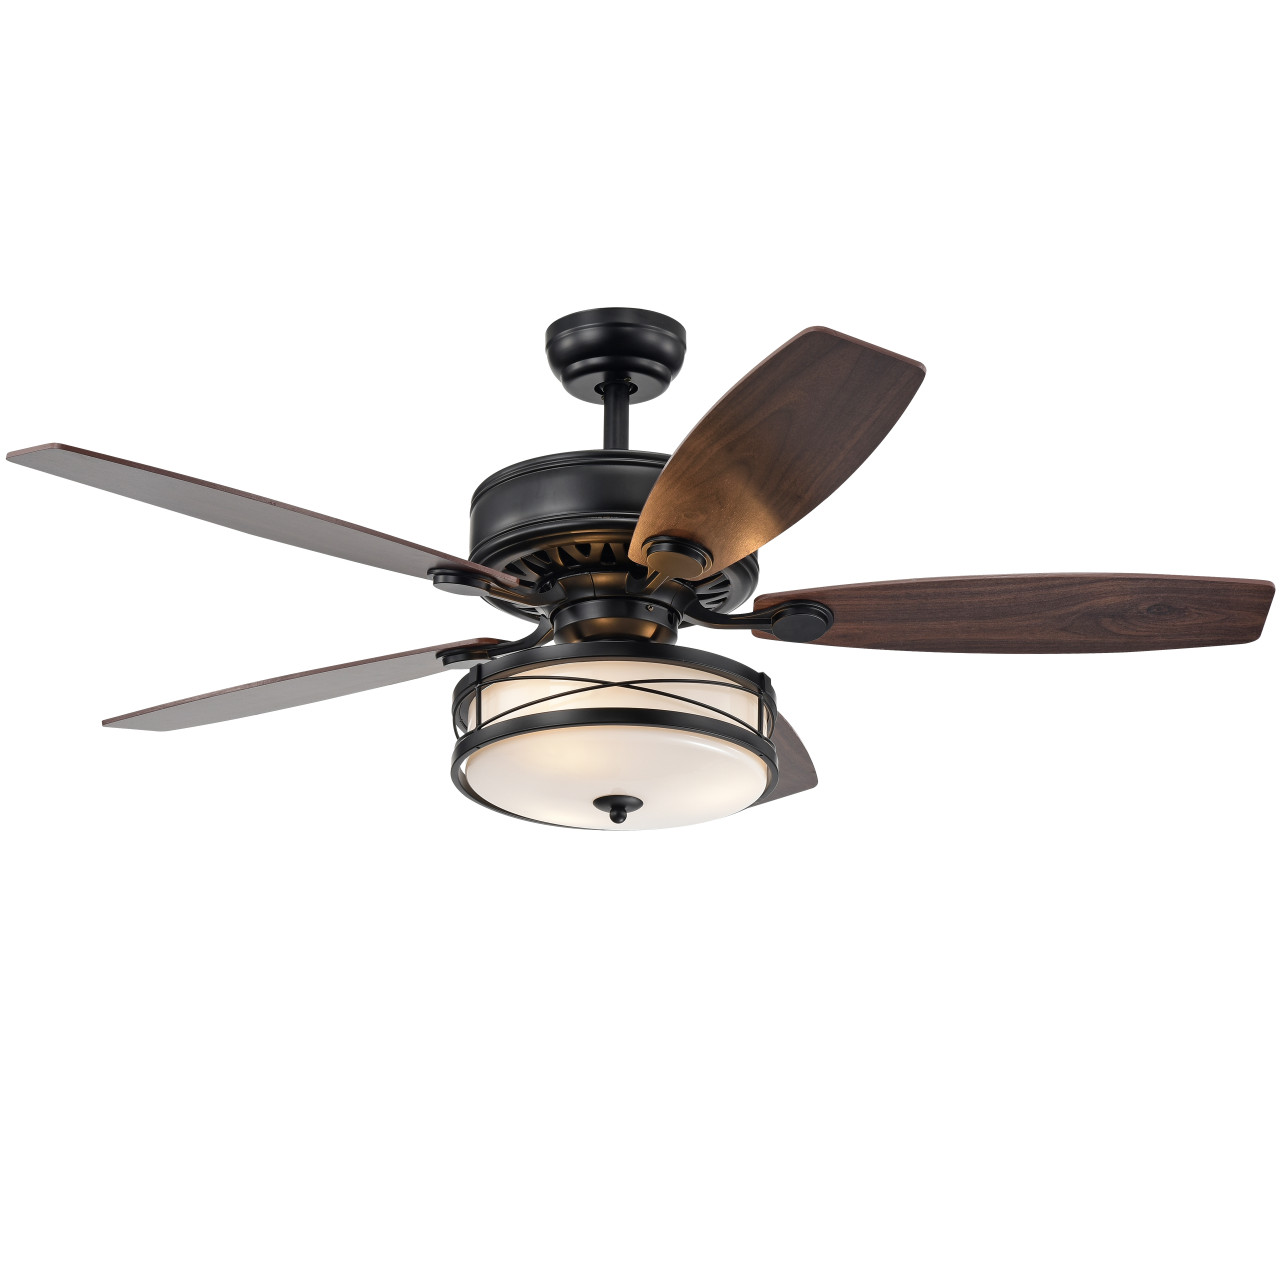 WAREHOUSE OF TIFFANY'S CFL-8455REMO/MB Ti 52 in. 3-Light Indoor Black Finish Remote Controlled Ceiling Fan with Light Kit